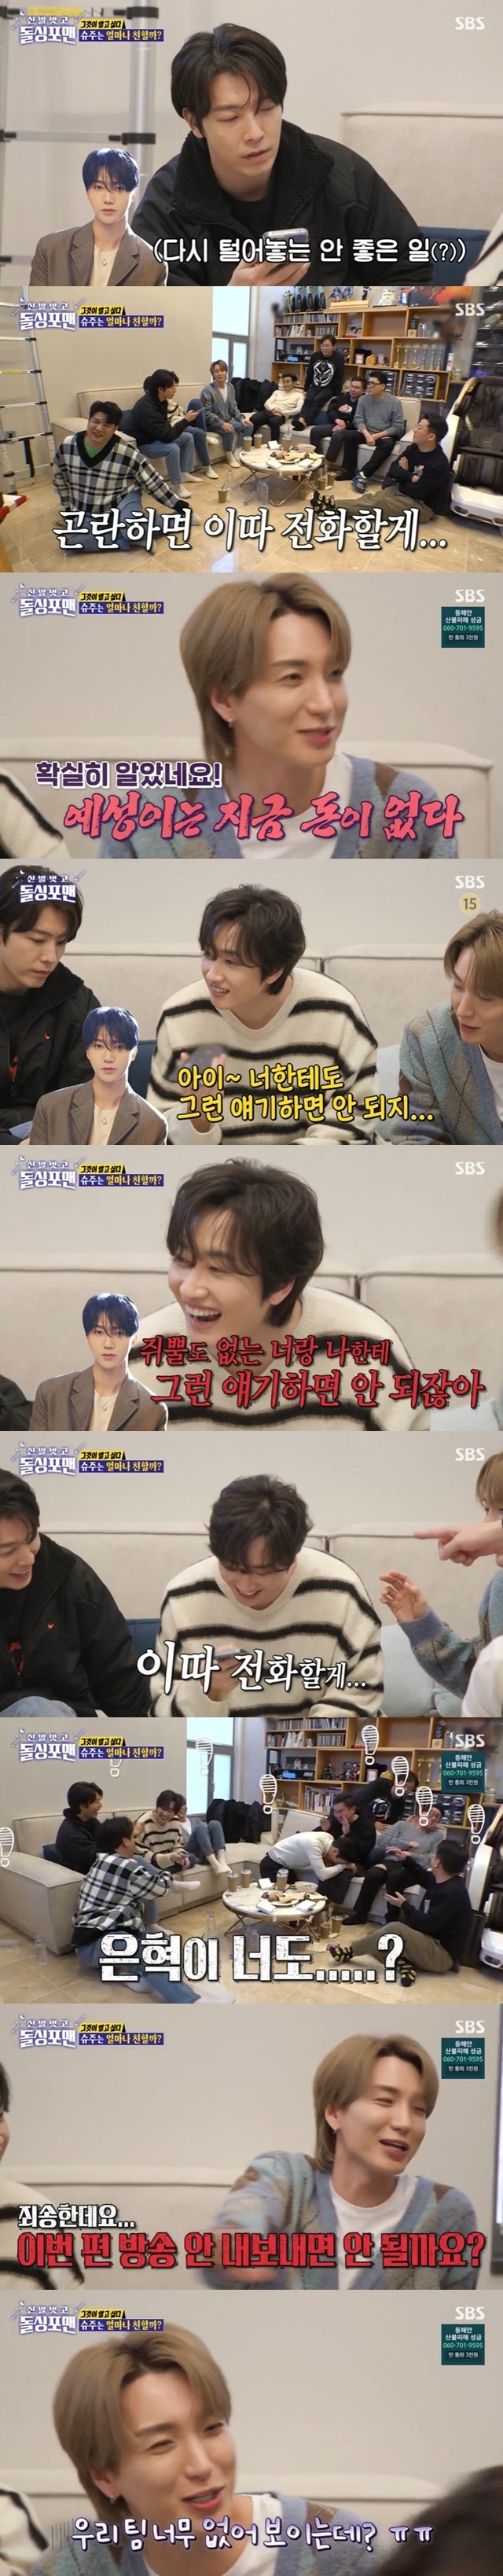 Yesungs unexpected Confessions devastated Super Junior and Dolsing Forman.On March 15, SBS Take off your shoes and dolsing foreman, Super Junior Leeteuk, Shindong, Dong-Hae, Eunhyuk and Choi Siwon appeared.On the same day, Super Junior in the 18th year of the show revealed the story of 12 people starting and nine members through 13 people, and the 10 years battle between Leeteuk and Kim Hee-chul, who had led to the self-fight and the crisis of dismantling, which led Ryeo-wook and Choi Siwon to take commercials for securities companies.Lee Sang-min led the game by saying, You have to call the member and listen to this word. Dong-Hae became a position to listen to the words You are really funny and You are really funny.Choi Siwon has to listen to Do you need money? and Can you lend money?Dong-Hae and Choi Siwon called Yesung in turn, and Yesung answered Choi Siwons phone and said, Dong-Hae also called.I was on the phone, he said.Choi Siwon lied to Yesung to tell him that I have to invest in a hurry, but Yesung said, Is that the story you talked about last time?Choi Siwon continued to play the game, saying, I have to invest in members, I think about three chapters per member. Yesung said, I have no money.Ive got a lot of bad things, he said seriously.Choi Siwon, who was embarrassed, hurriedly hung up to protect Yesung, saying, Ill call you back soon, and Dolsing Forman laughed.Then Yesung called Dong-Hae and Dong-Hae continued, saying, What do you mean Choi Siwon is investing? And Yesung said, What are you two doing?What are you doing? He said, I do not have a penny of real money right now.Dong-Hae also hung up to protect Yesung, saying, Ill call you later.Finally, Eunhyuk spoke to Yesung, and Yesung told Eunhyuk, You should not talk about it to you. You should not talk about it to people who do not have a rat.Eunhyuk, who was embarrassed, said, I will call you later, and hung up and said, Why are you making me a person without a rattling.